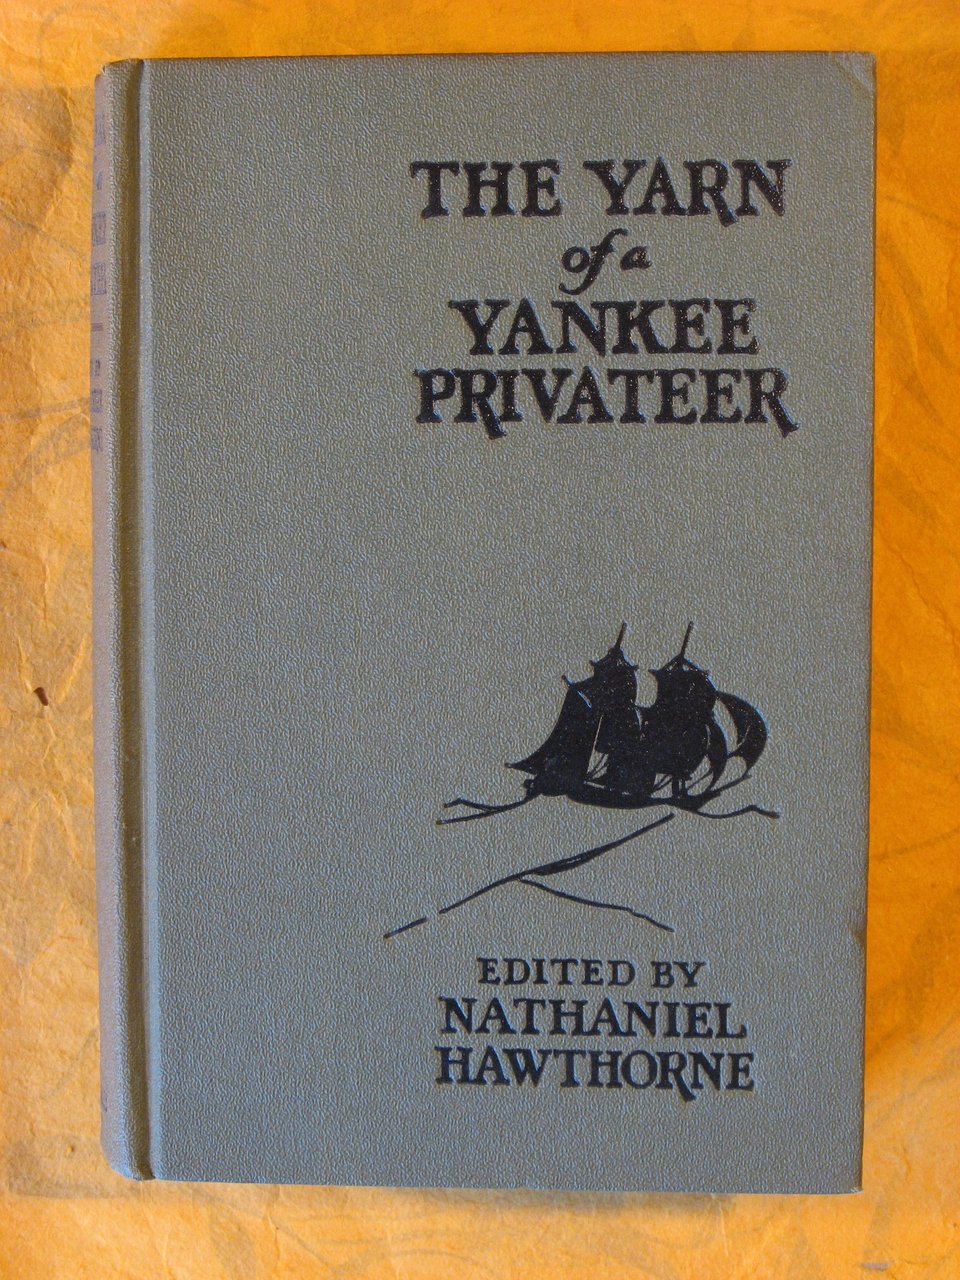 Yarn of a Yankee Privateer, the